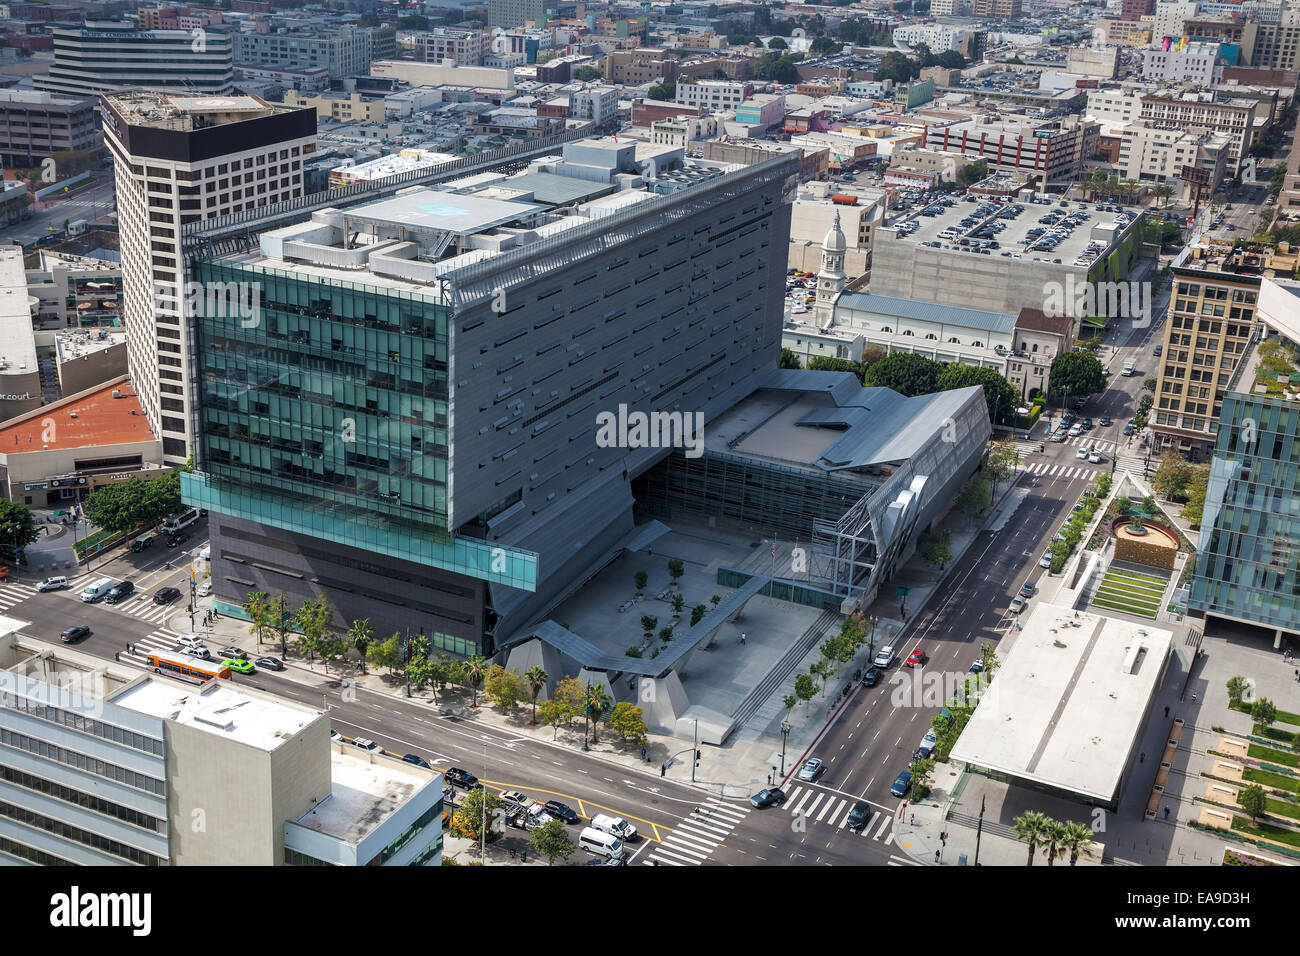 LOS ANGELES - APRIL 22: Caltrans District 7 Headquarters building on April 22, 2014 in Los Angeles, California. It serves the Ca Stock Photo